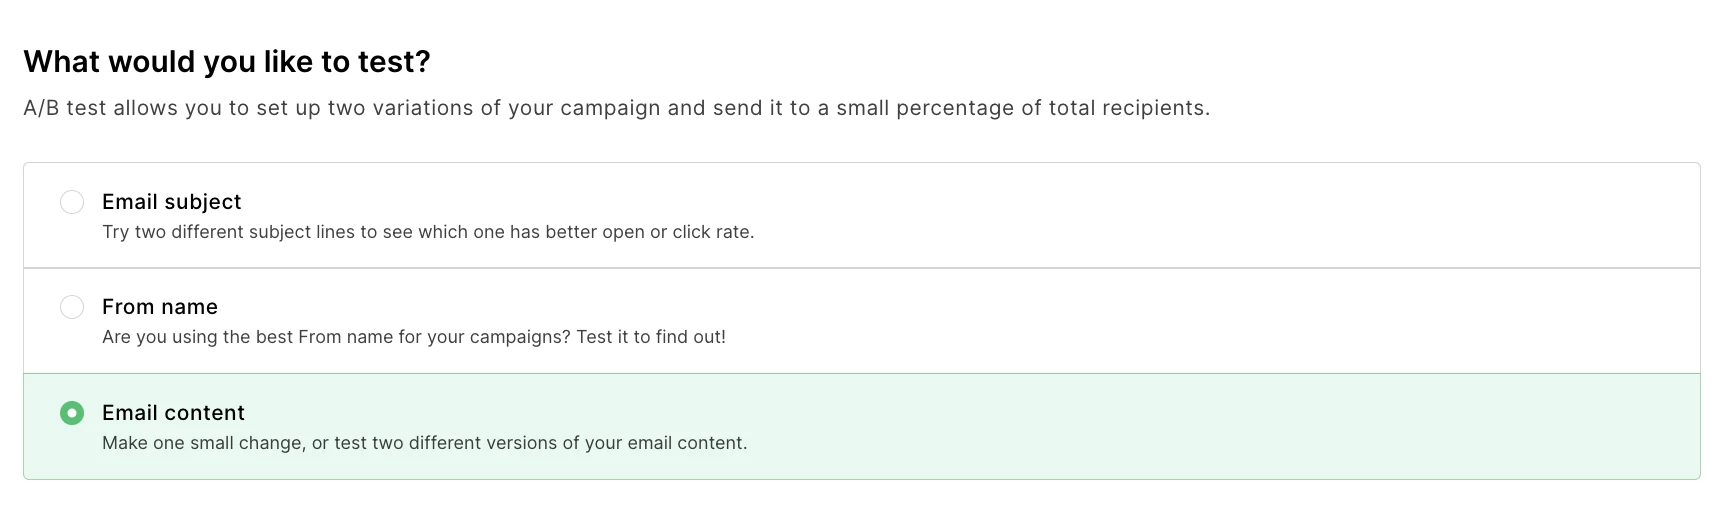 a/b test email content